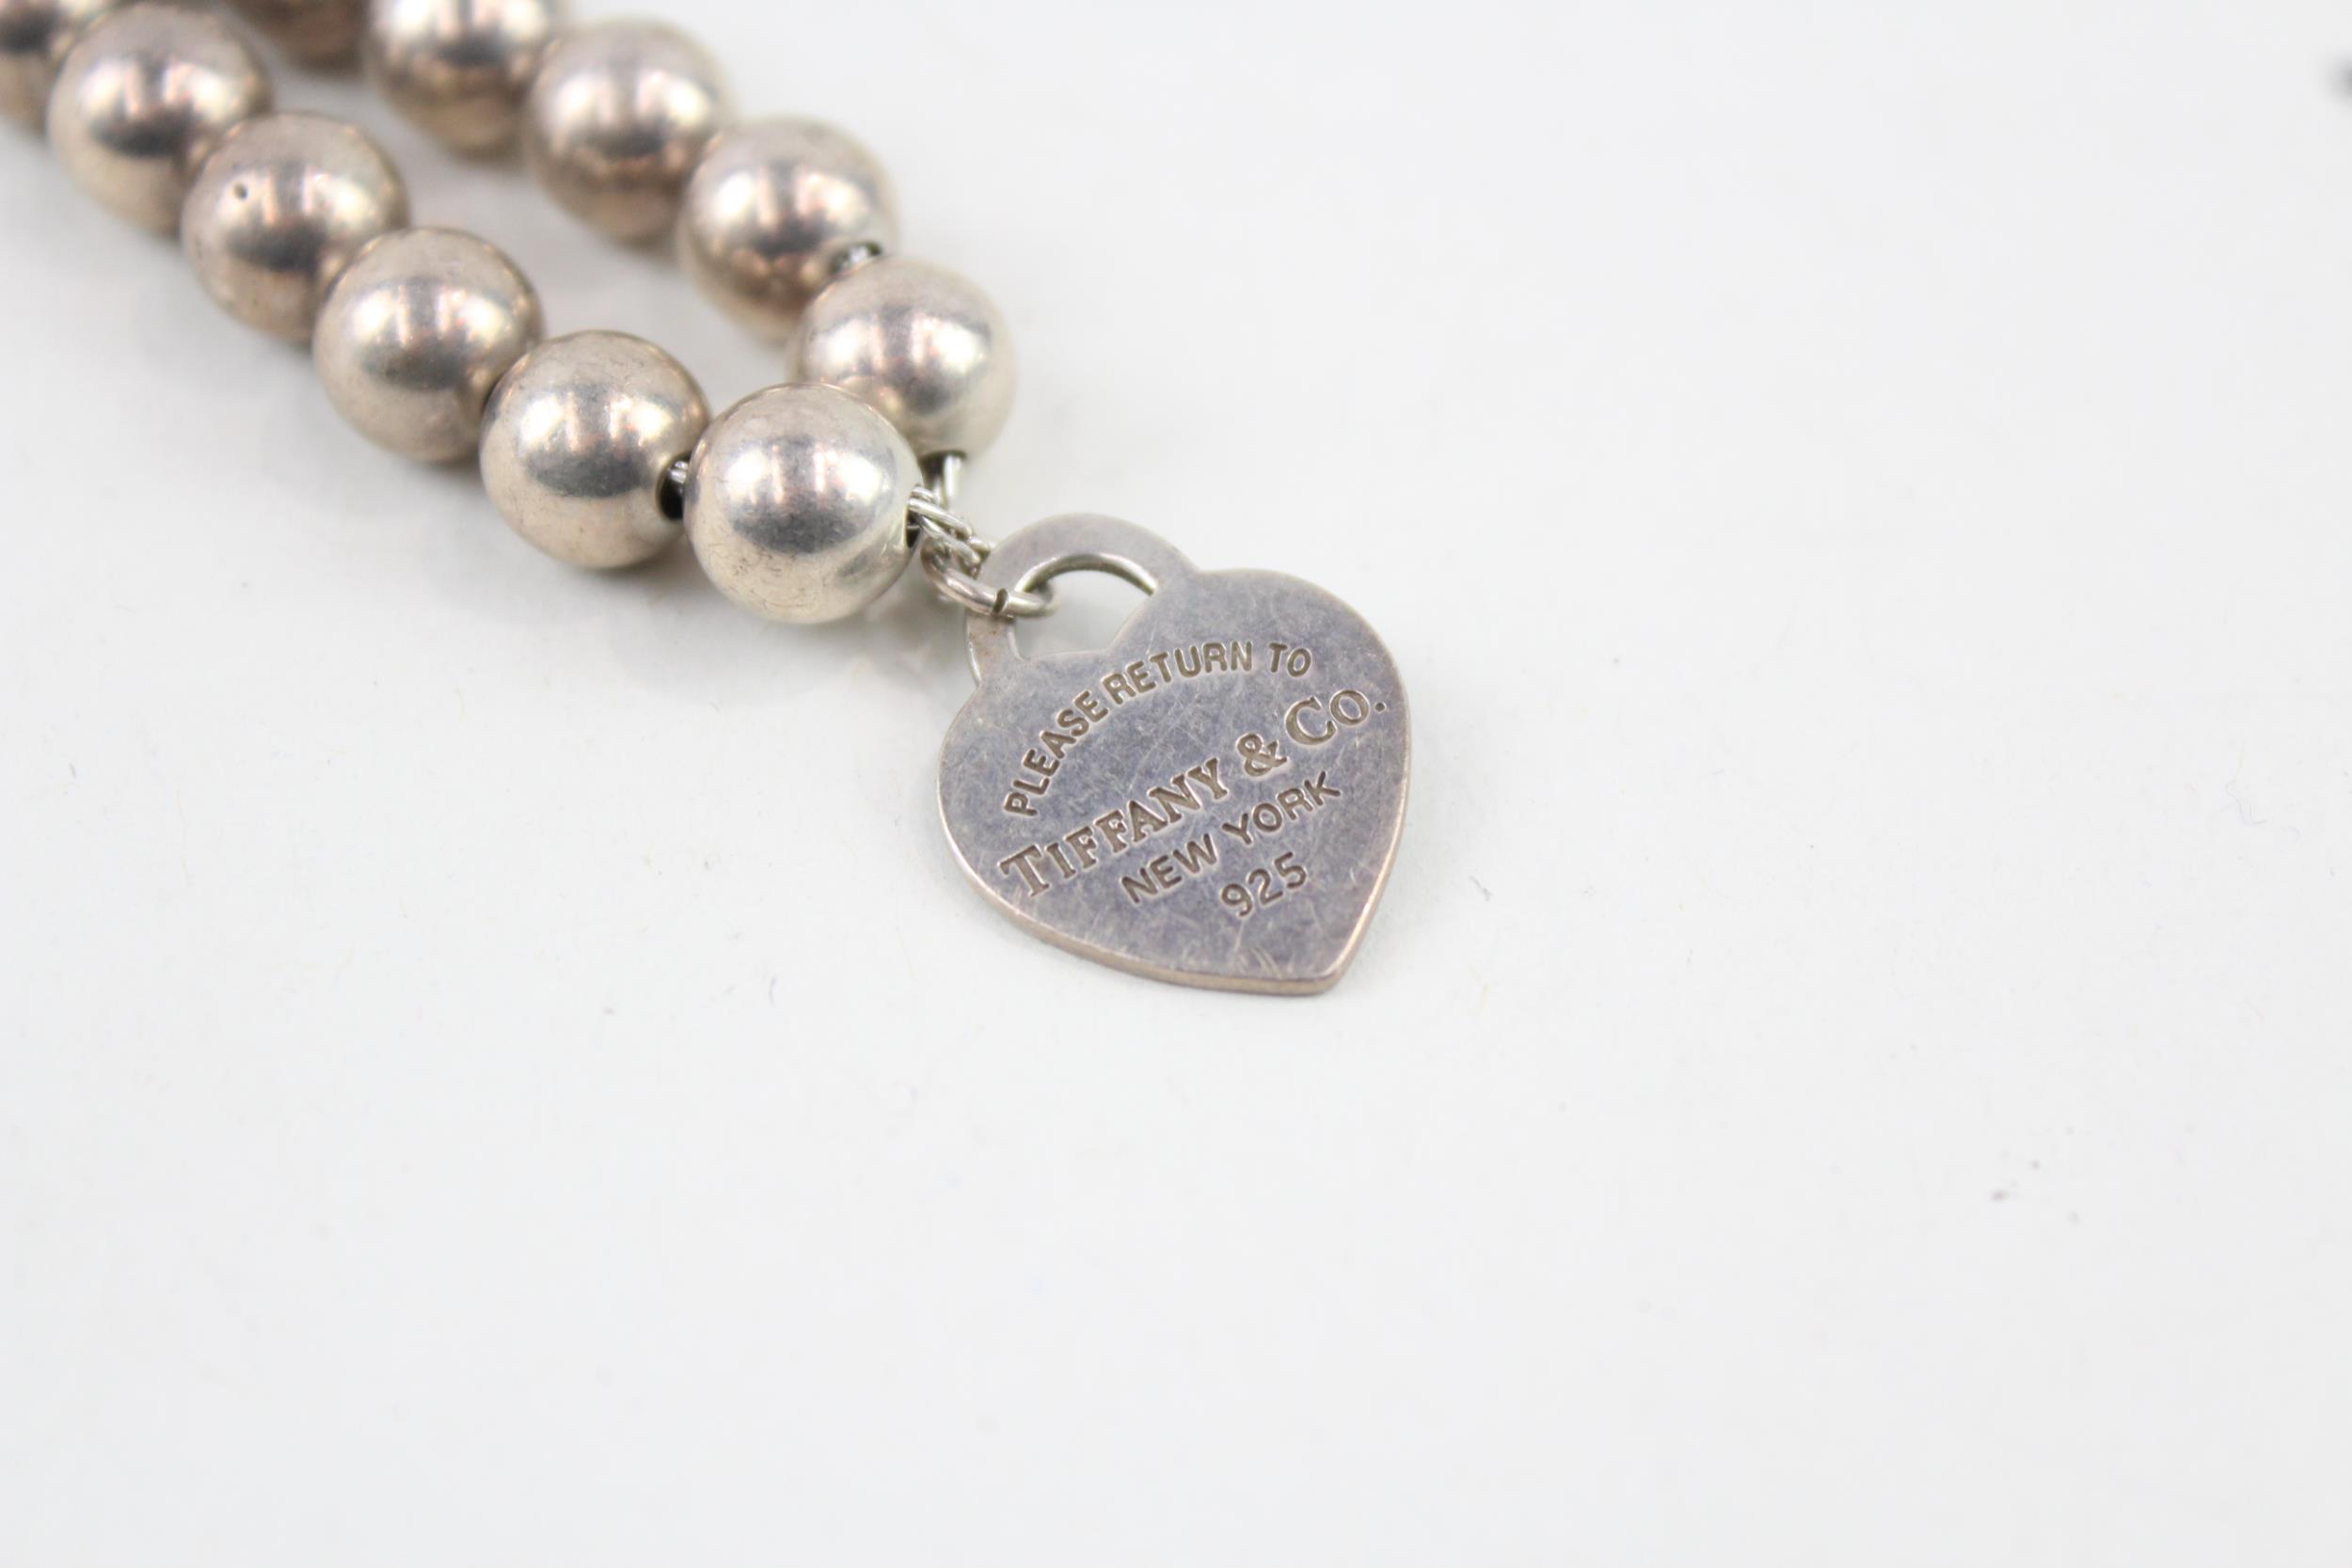 Silver bracelet with enamel heart charm by designer Tiffany & Co (16g) - Image 5 of 5